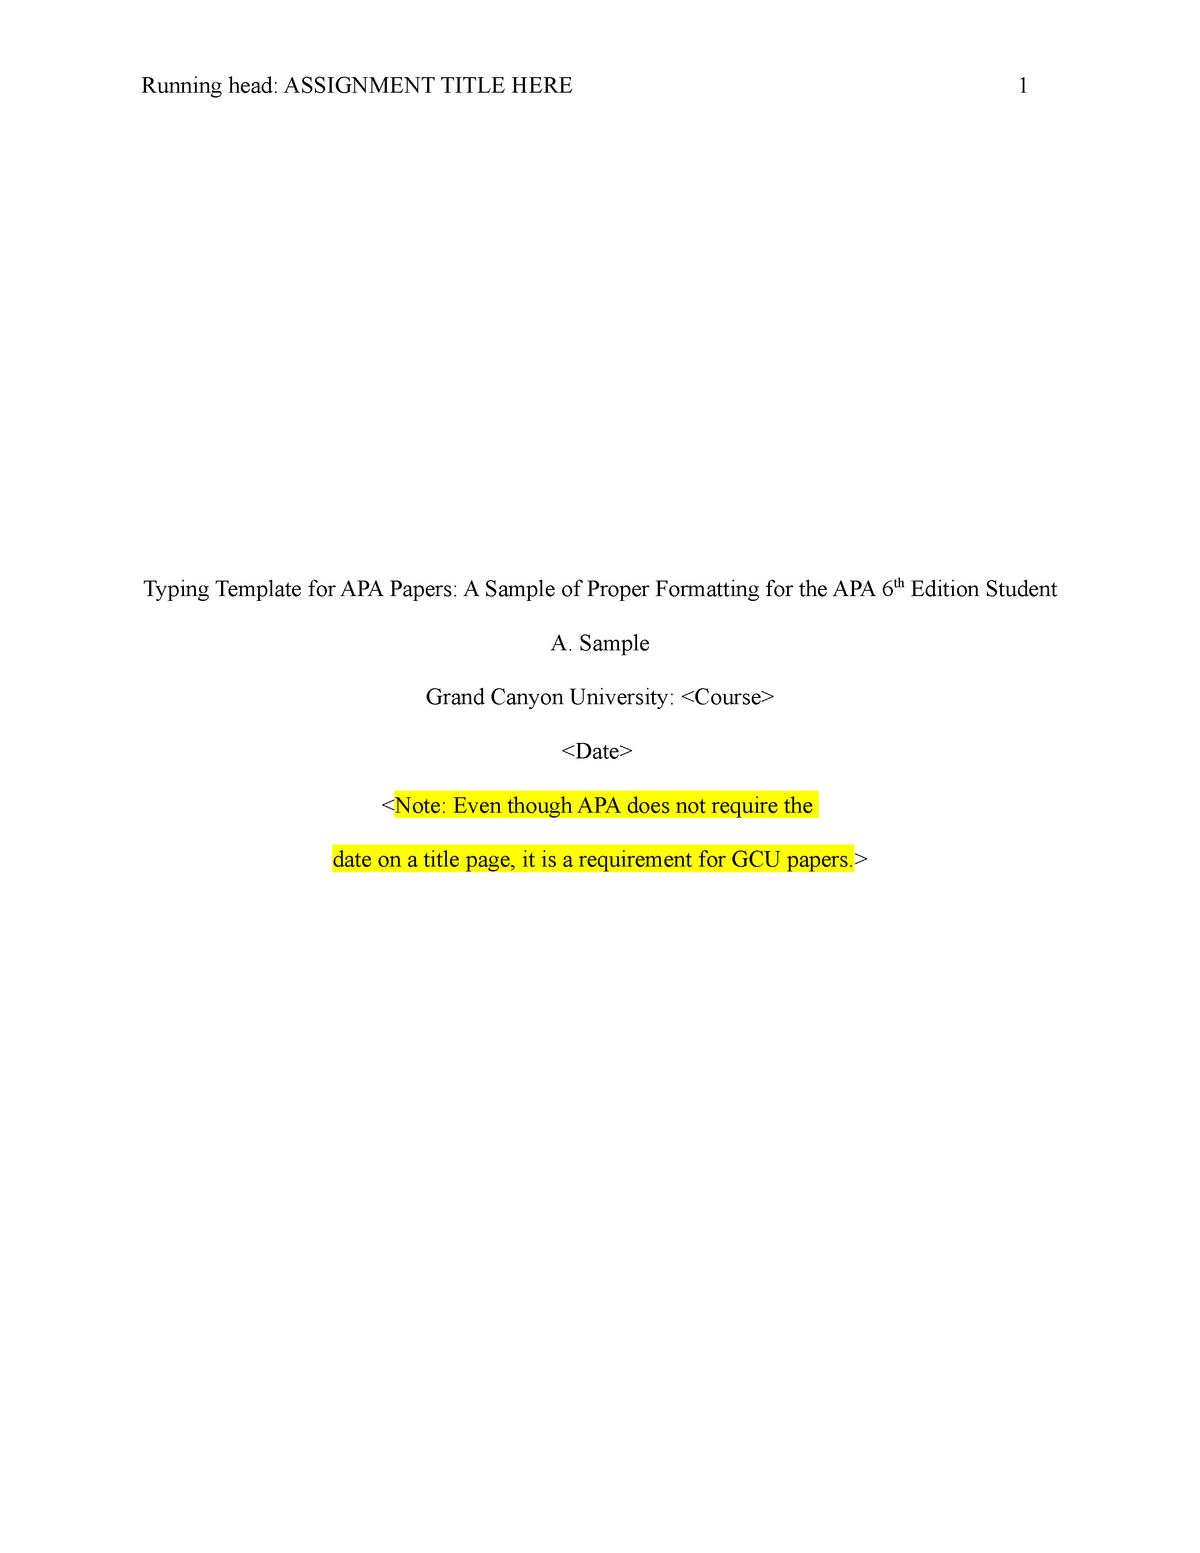 apa format paper with headings and subheadings